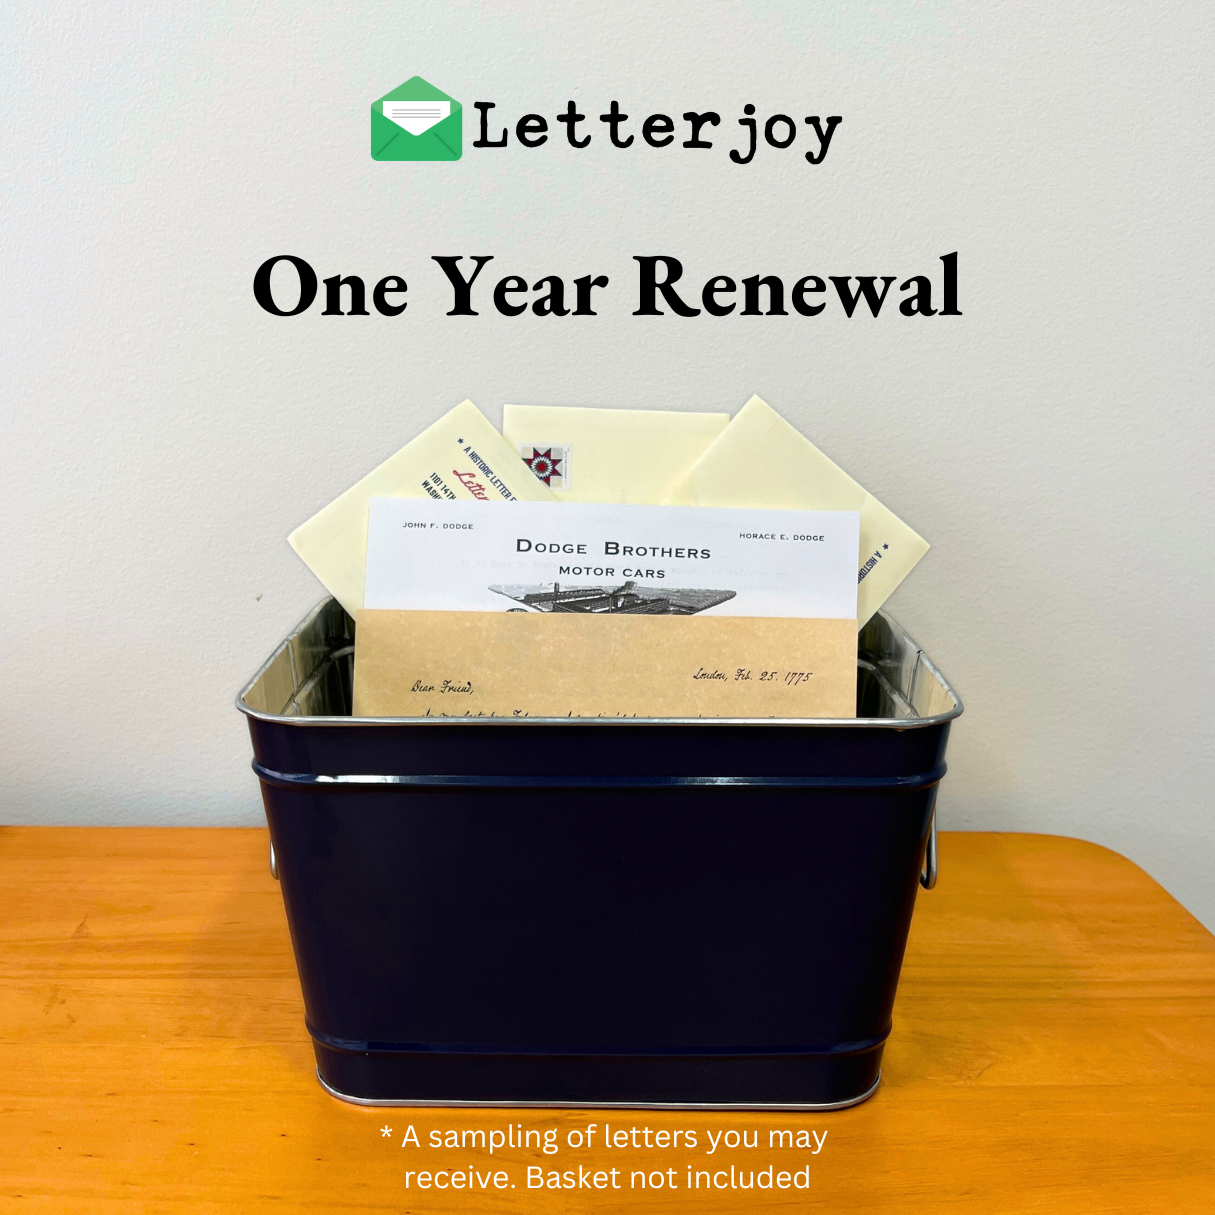 Renew Letterjoy For One Year